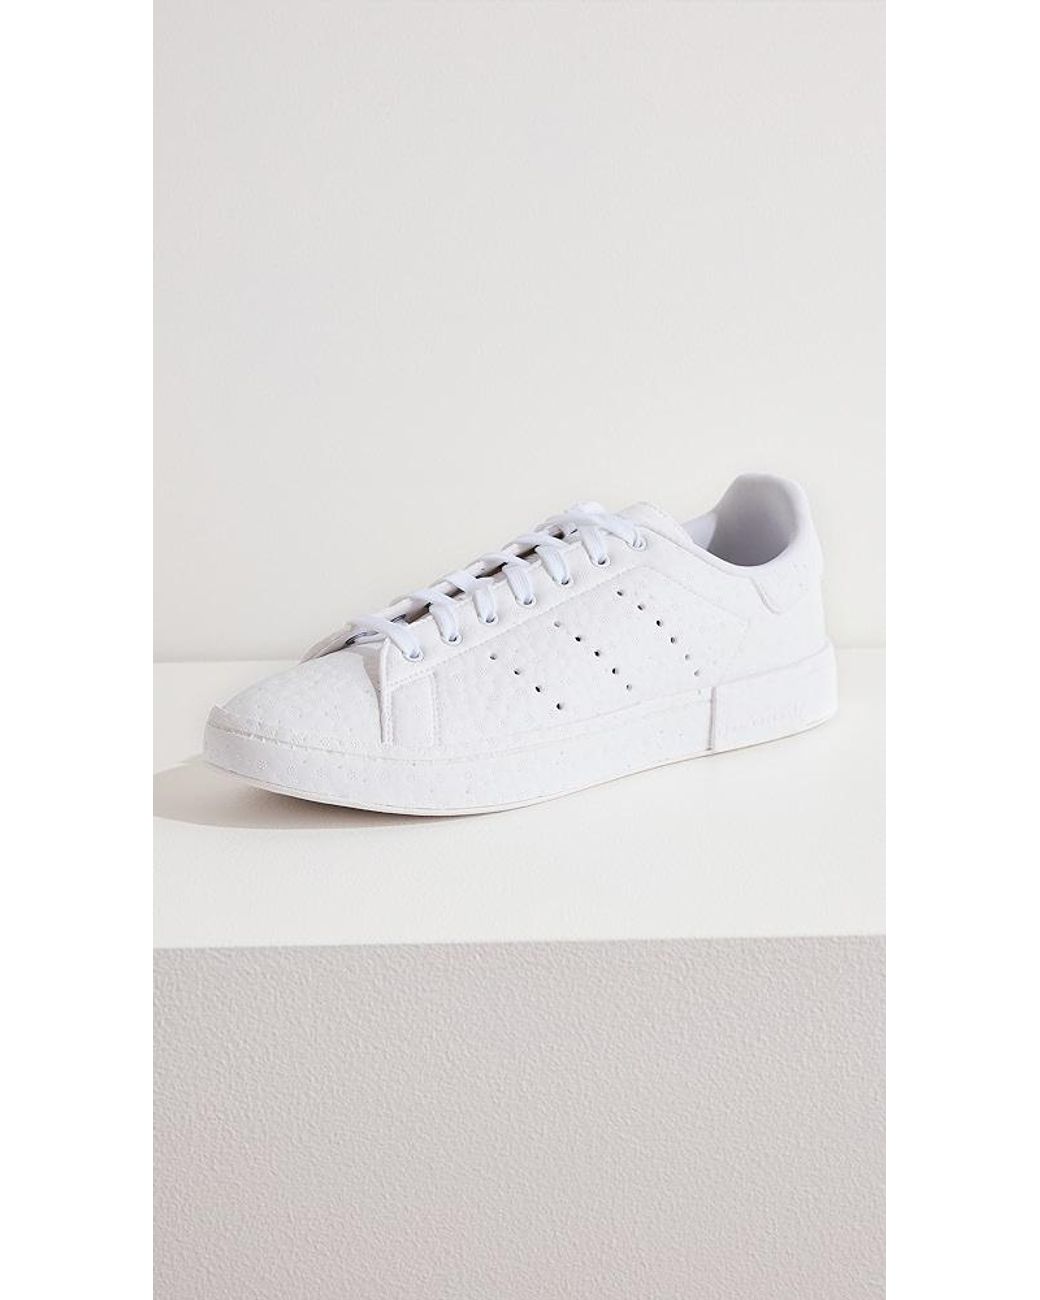 adidas Stan Smith Boost Sneakers in White | Lyst